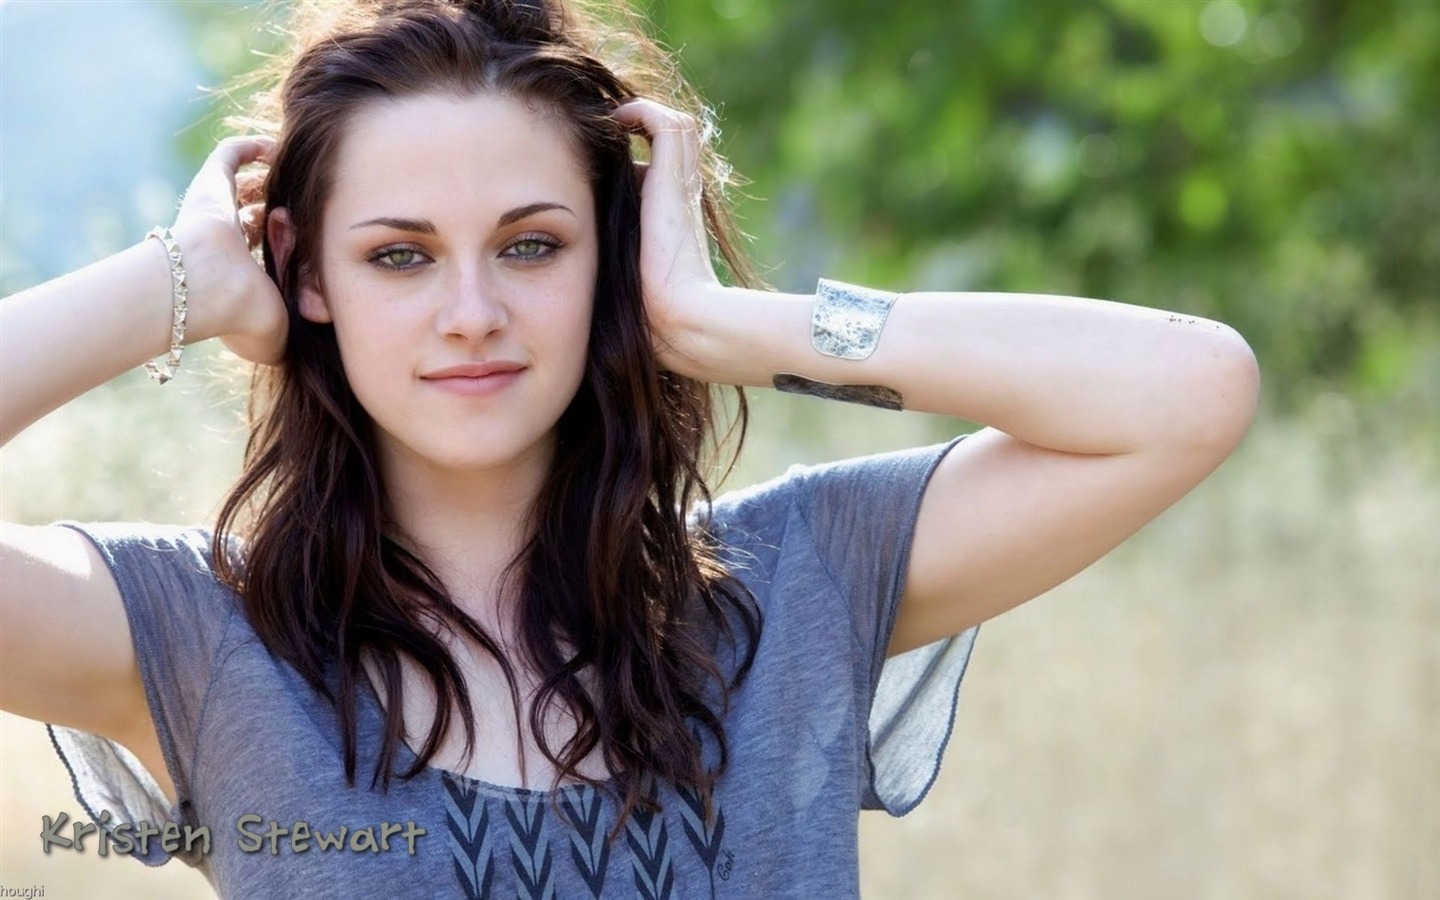 Kristen Stewart #014 - 1440x900 Wallpapers Pictures Photos Images